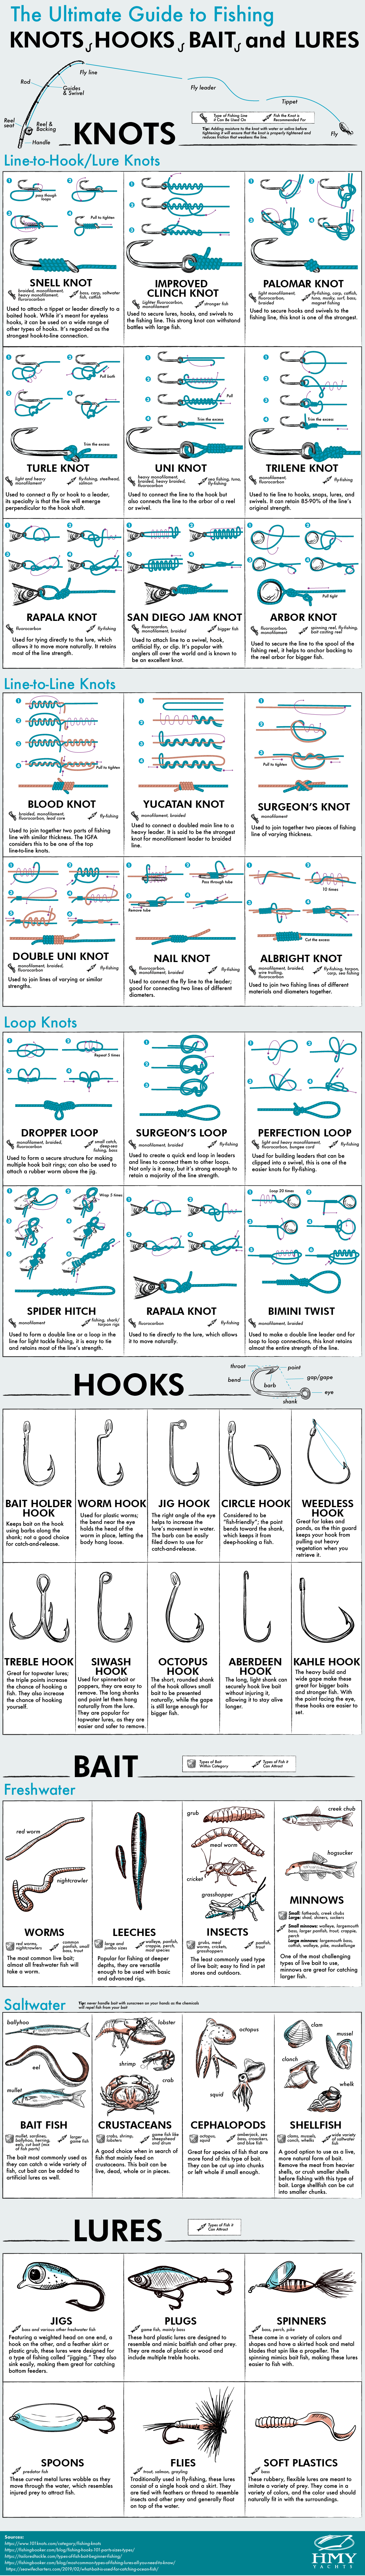 The Ultimate Guide to Fishing Knots, Hooks, Bait, and Lures